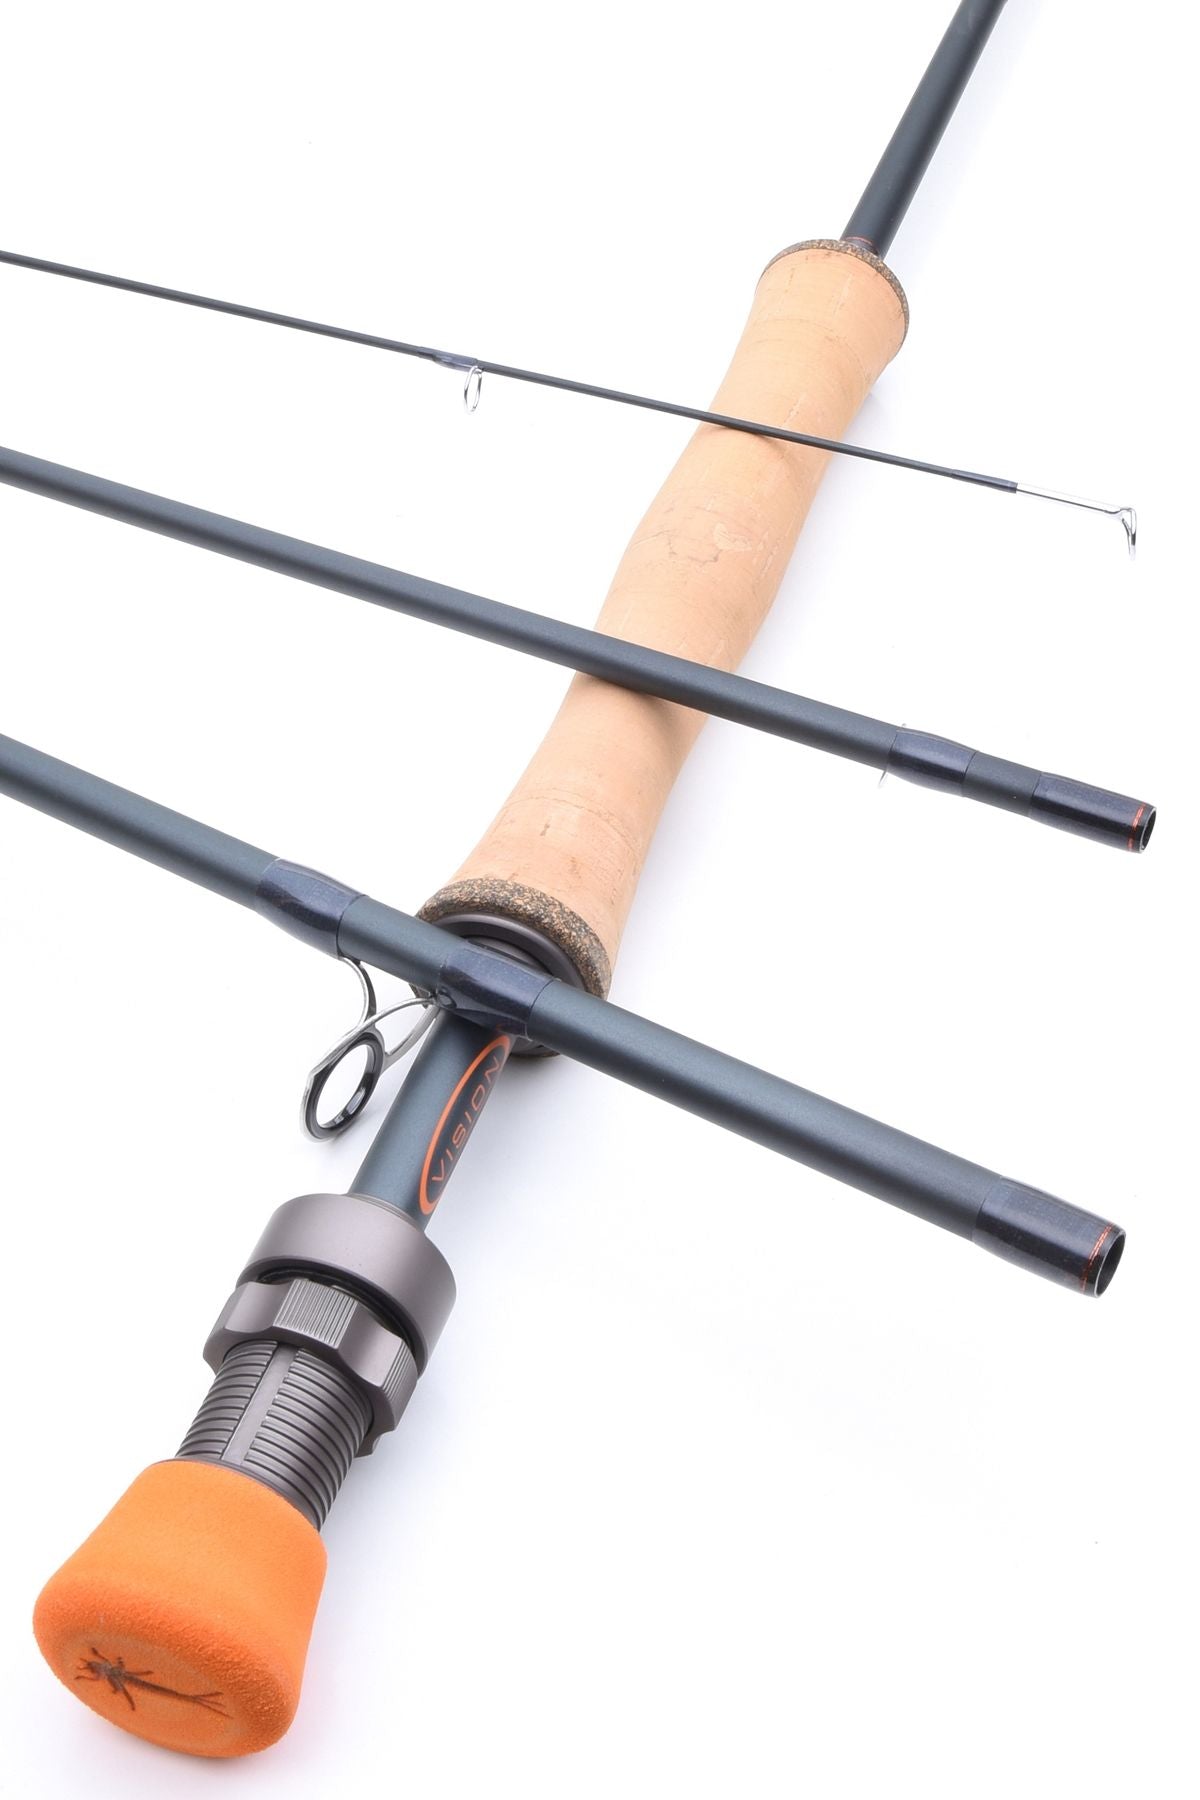 VISION STILLMANIAC FLY RODS - SAVE £100 OFF RRP!